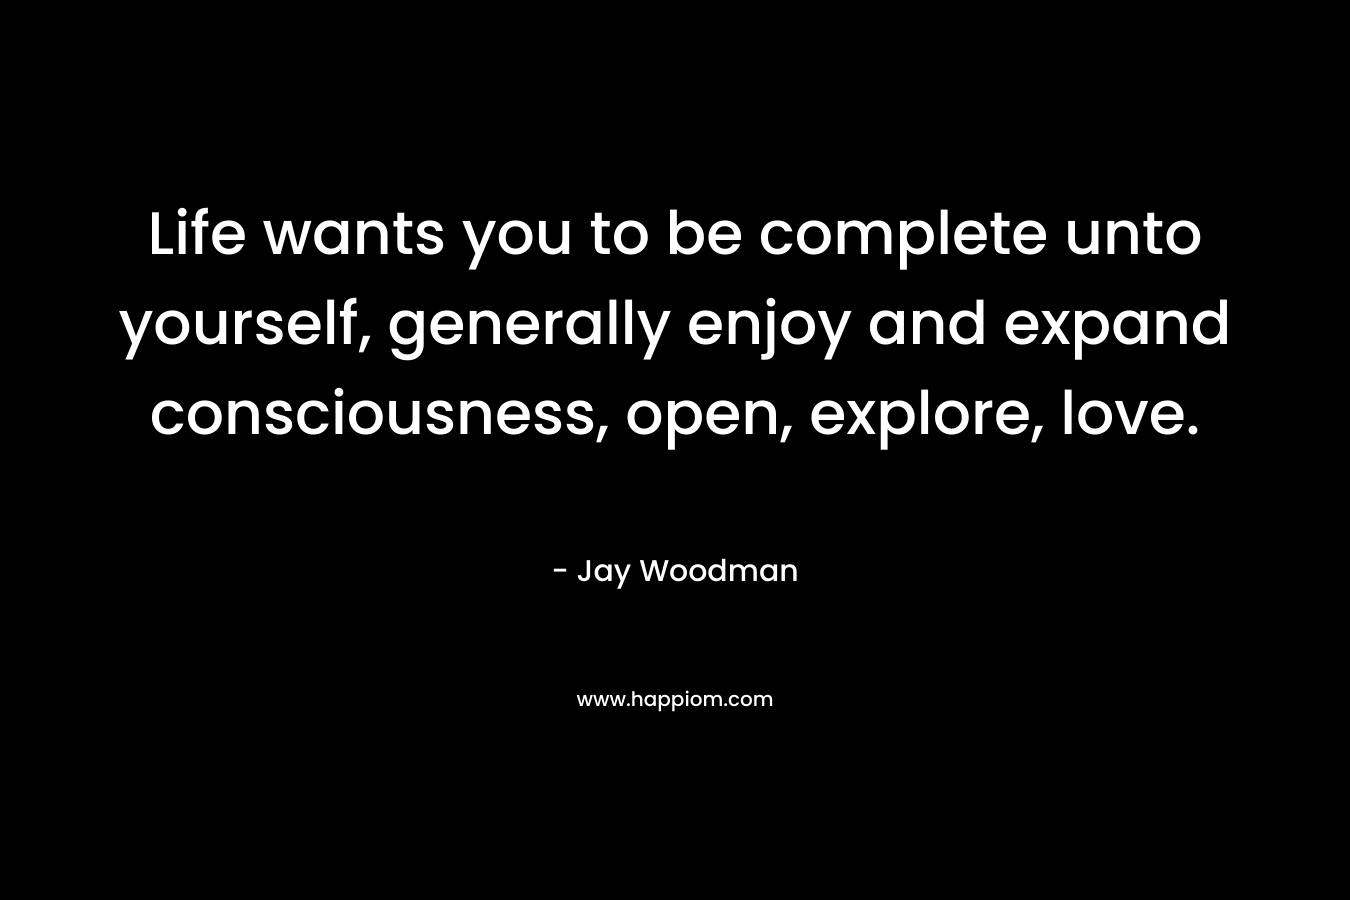 Life wants you to be complete unto yourself, generally enjoy and expand consciousness, open, explore, love.